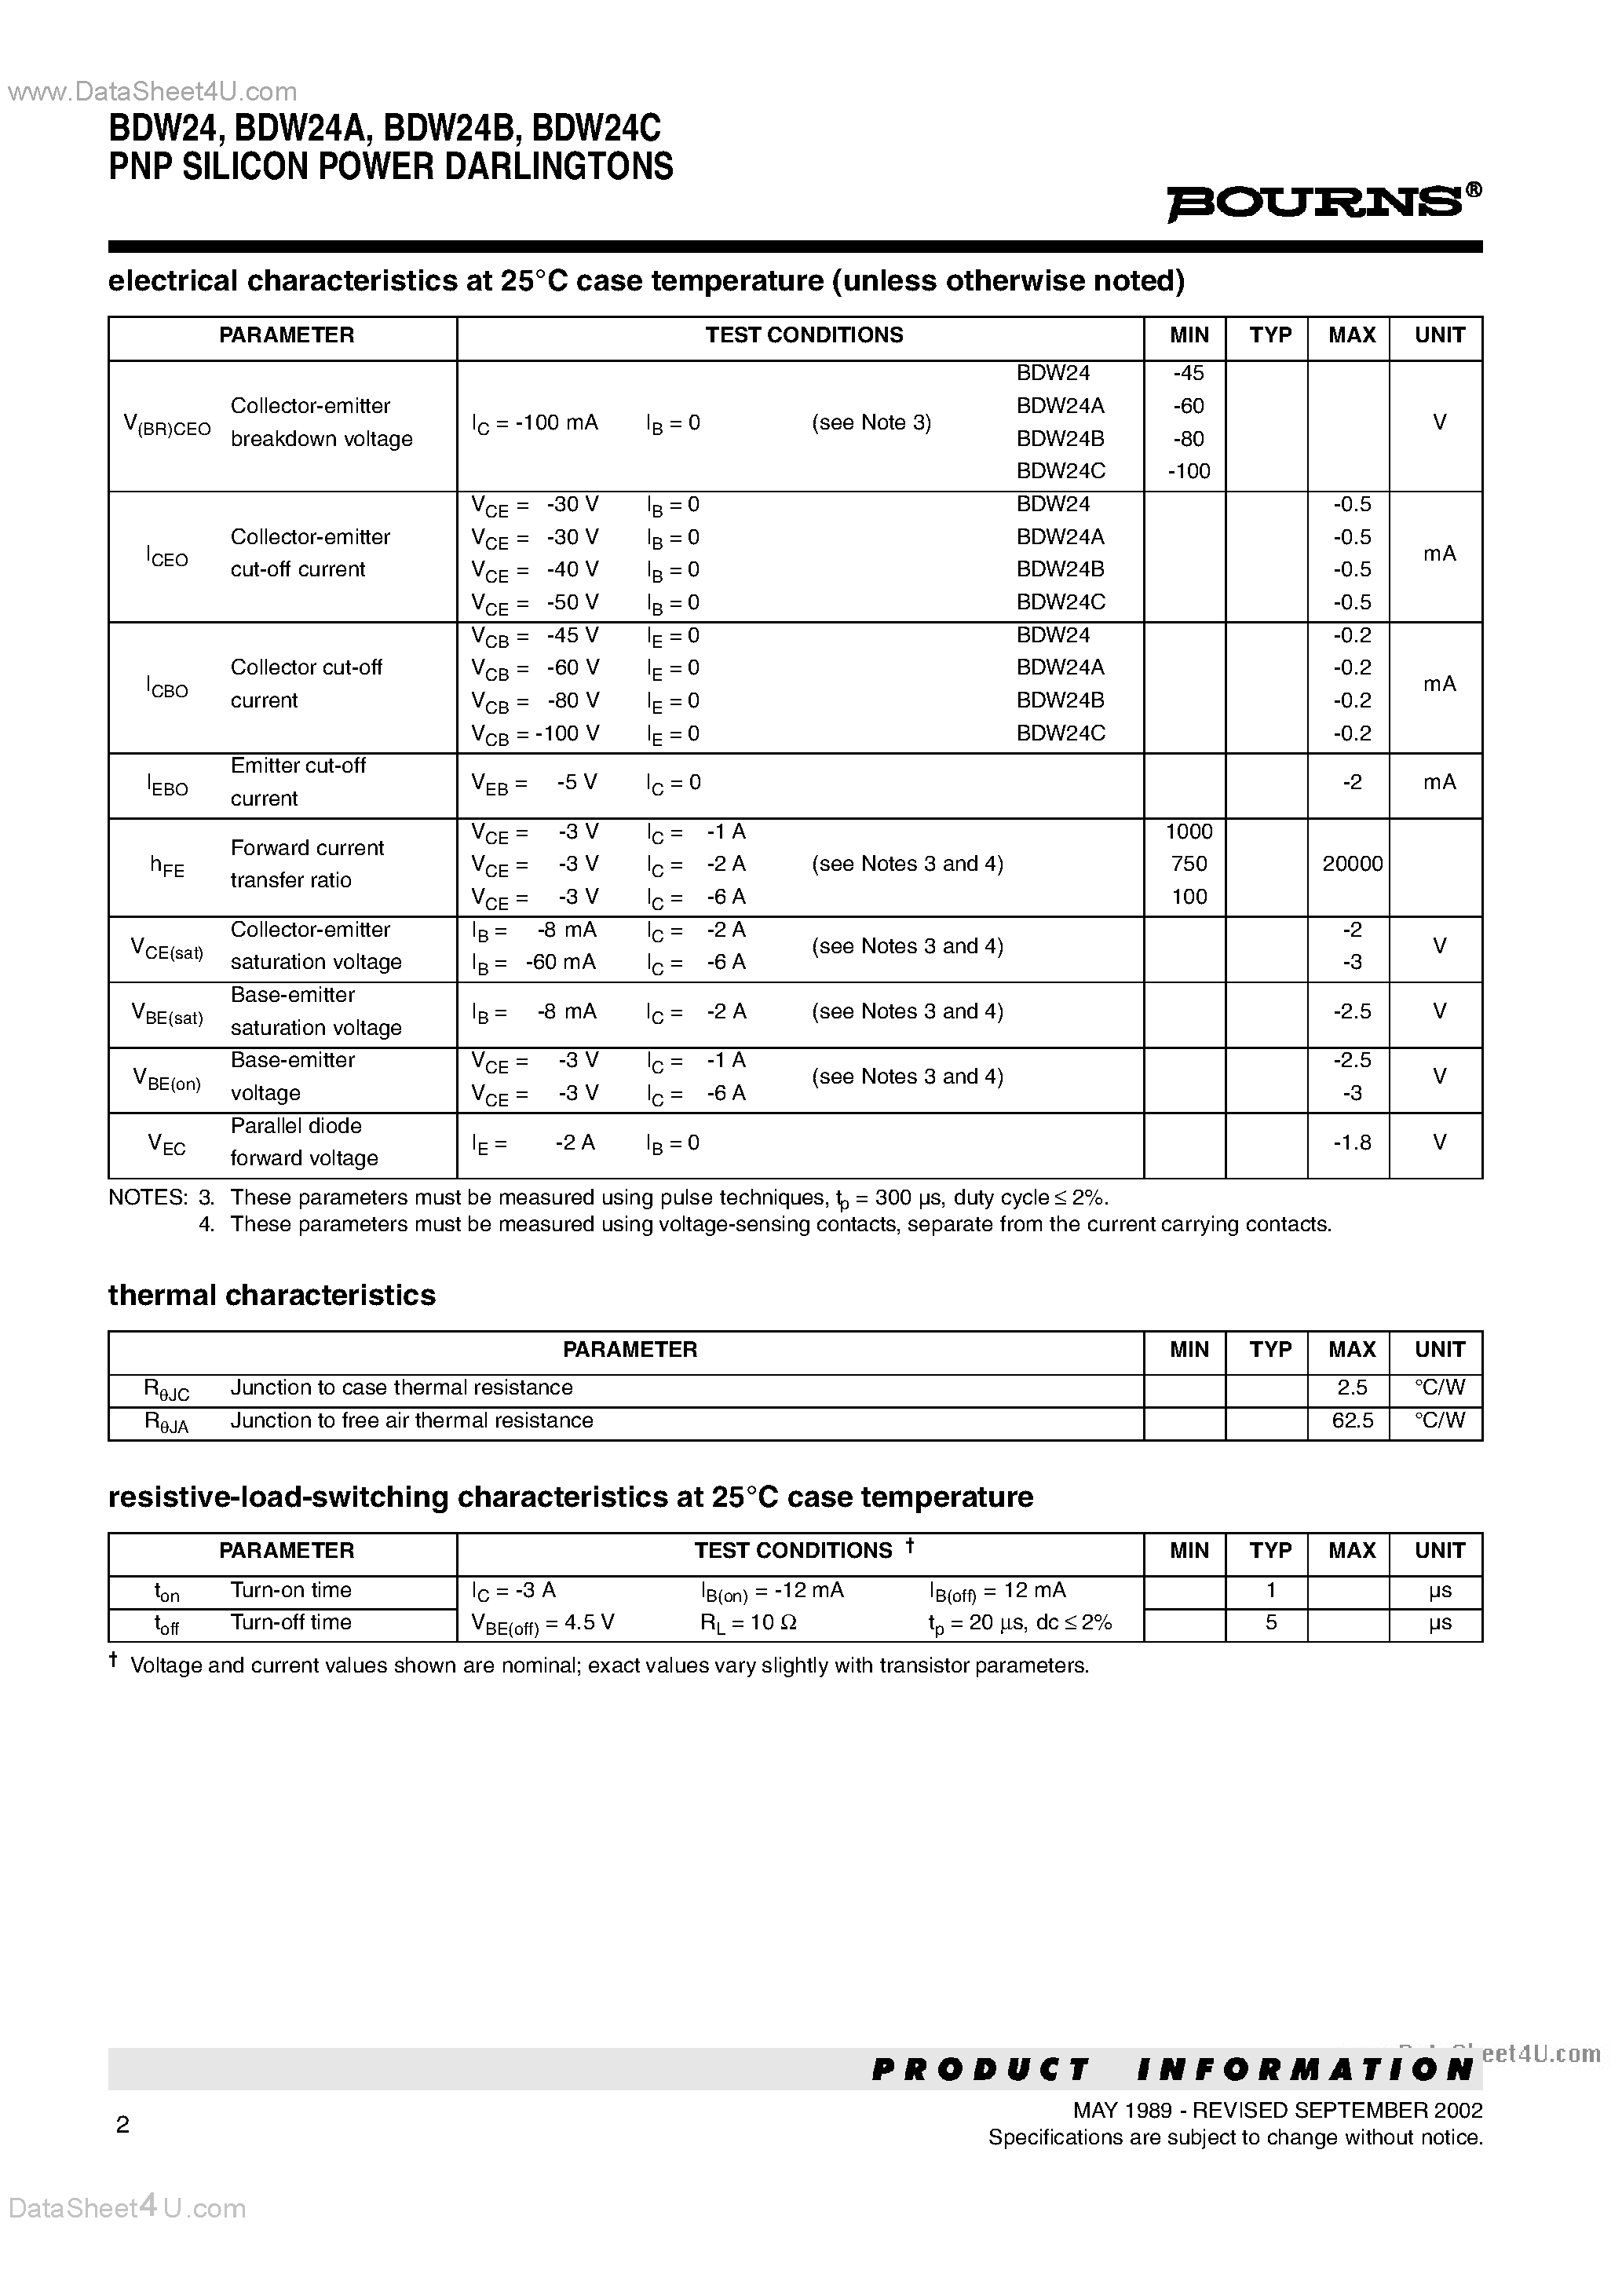 Datasheet BDW24 - PNP SILICON POWER DARLINGTONS page 2